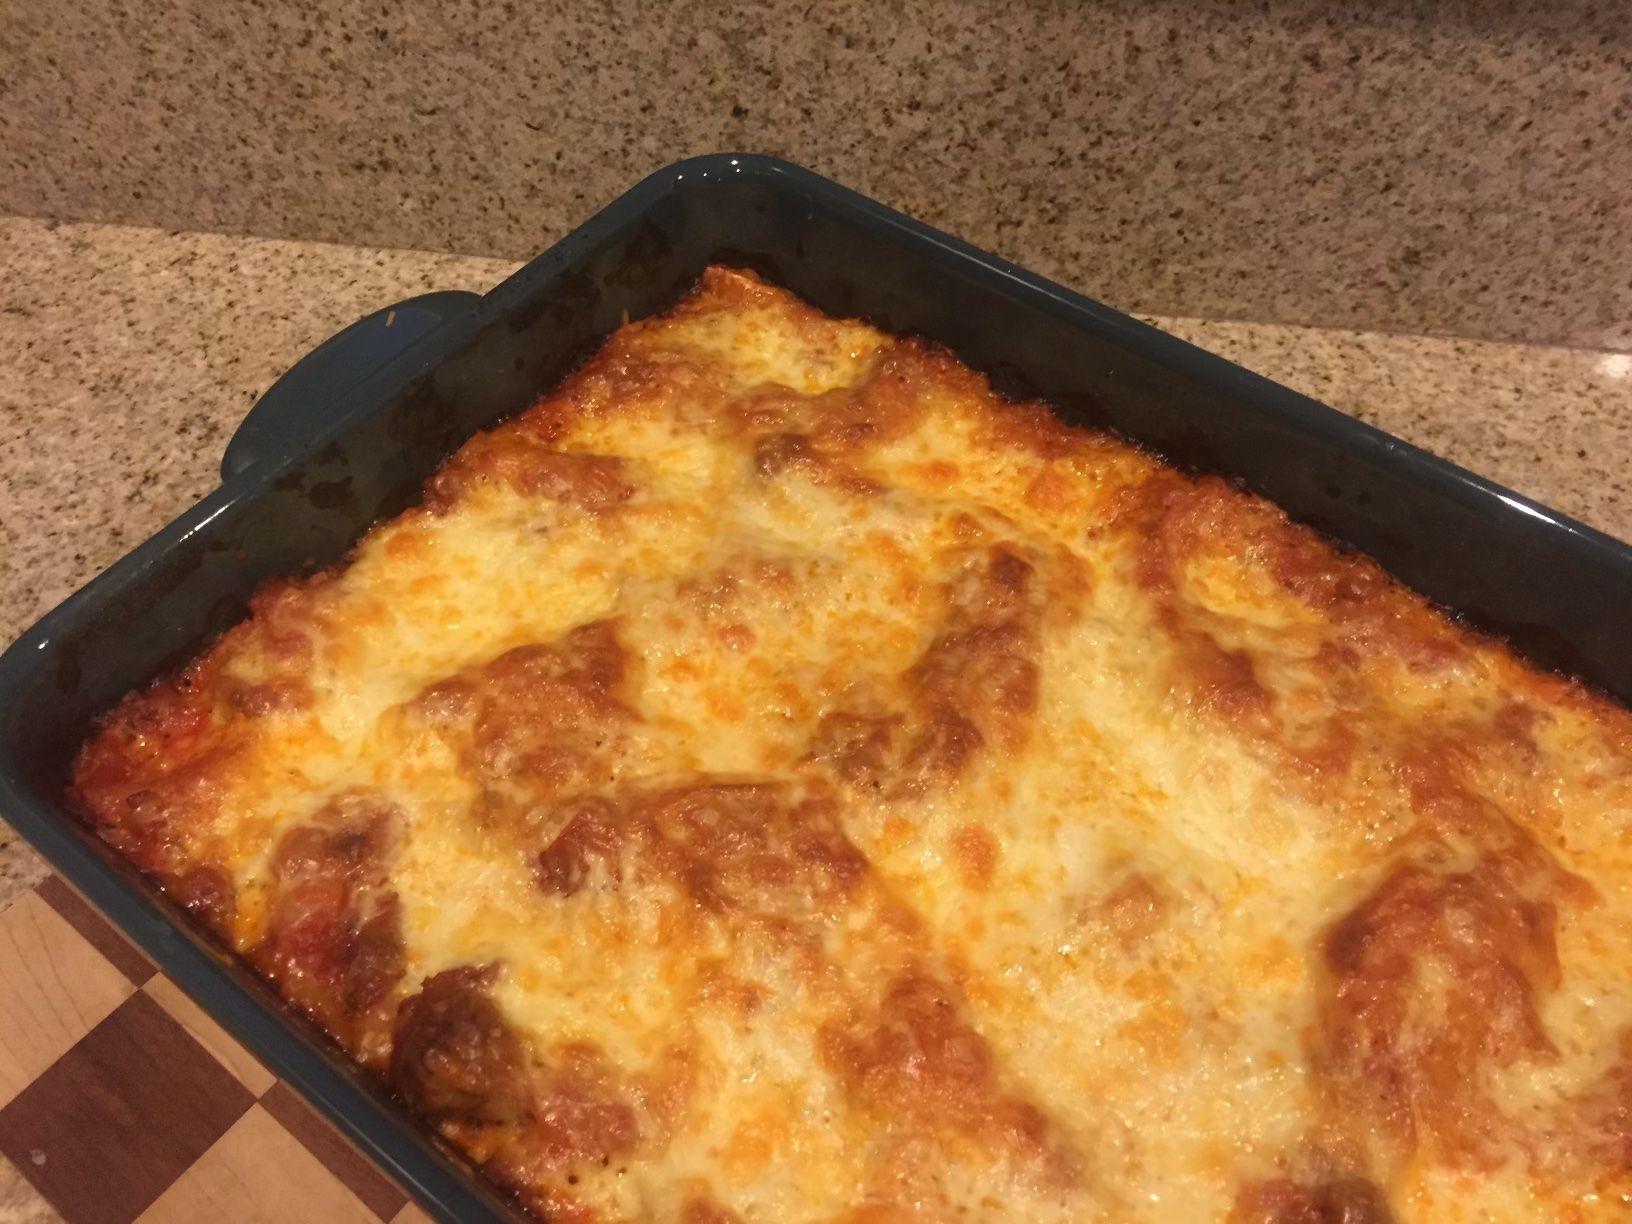 Lasagna - freshly out of the oven